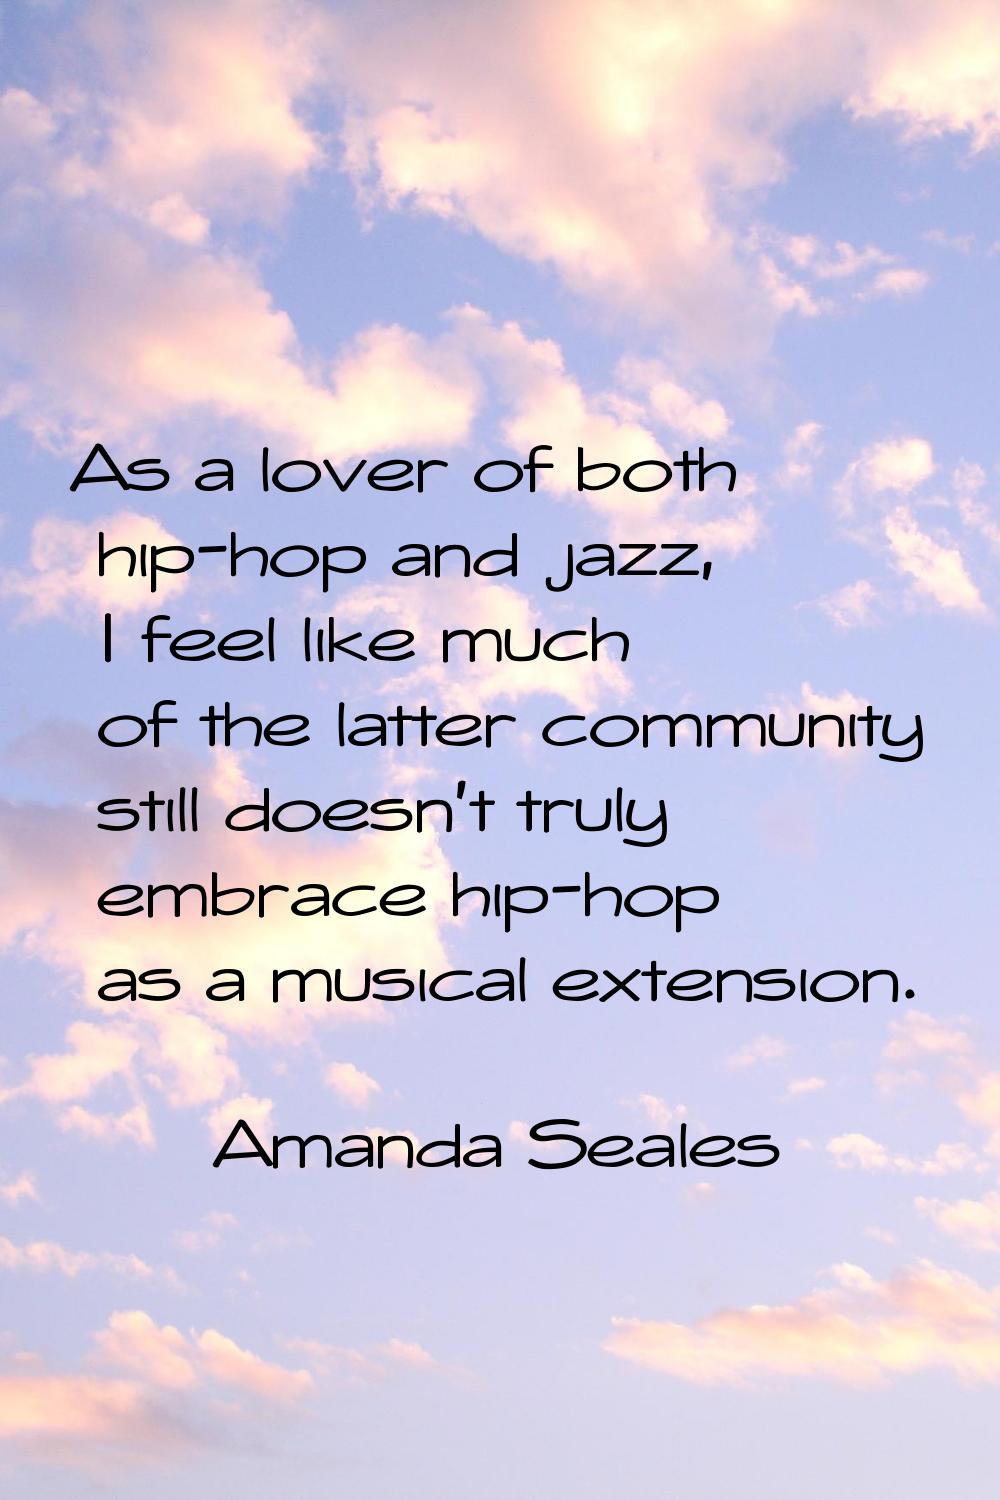 As a lover of both hip-hop and jazz, I feel like much of the latter community still doesn't truly e